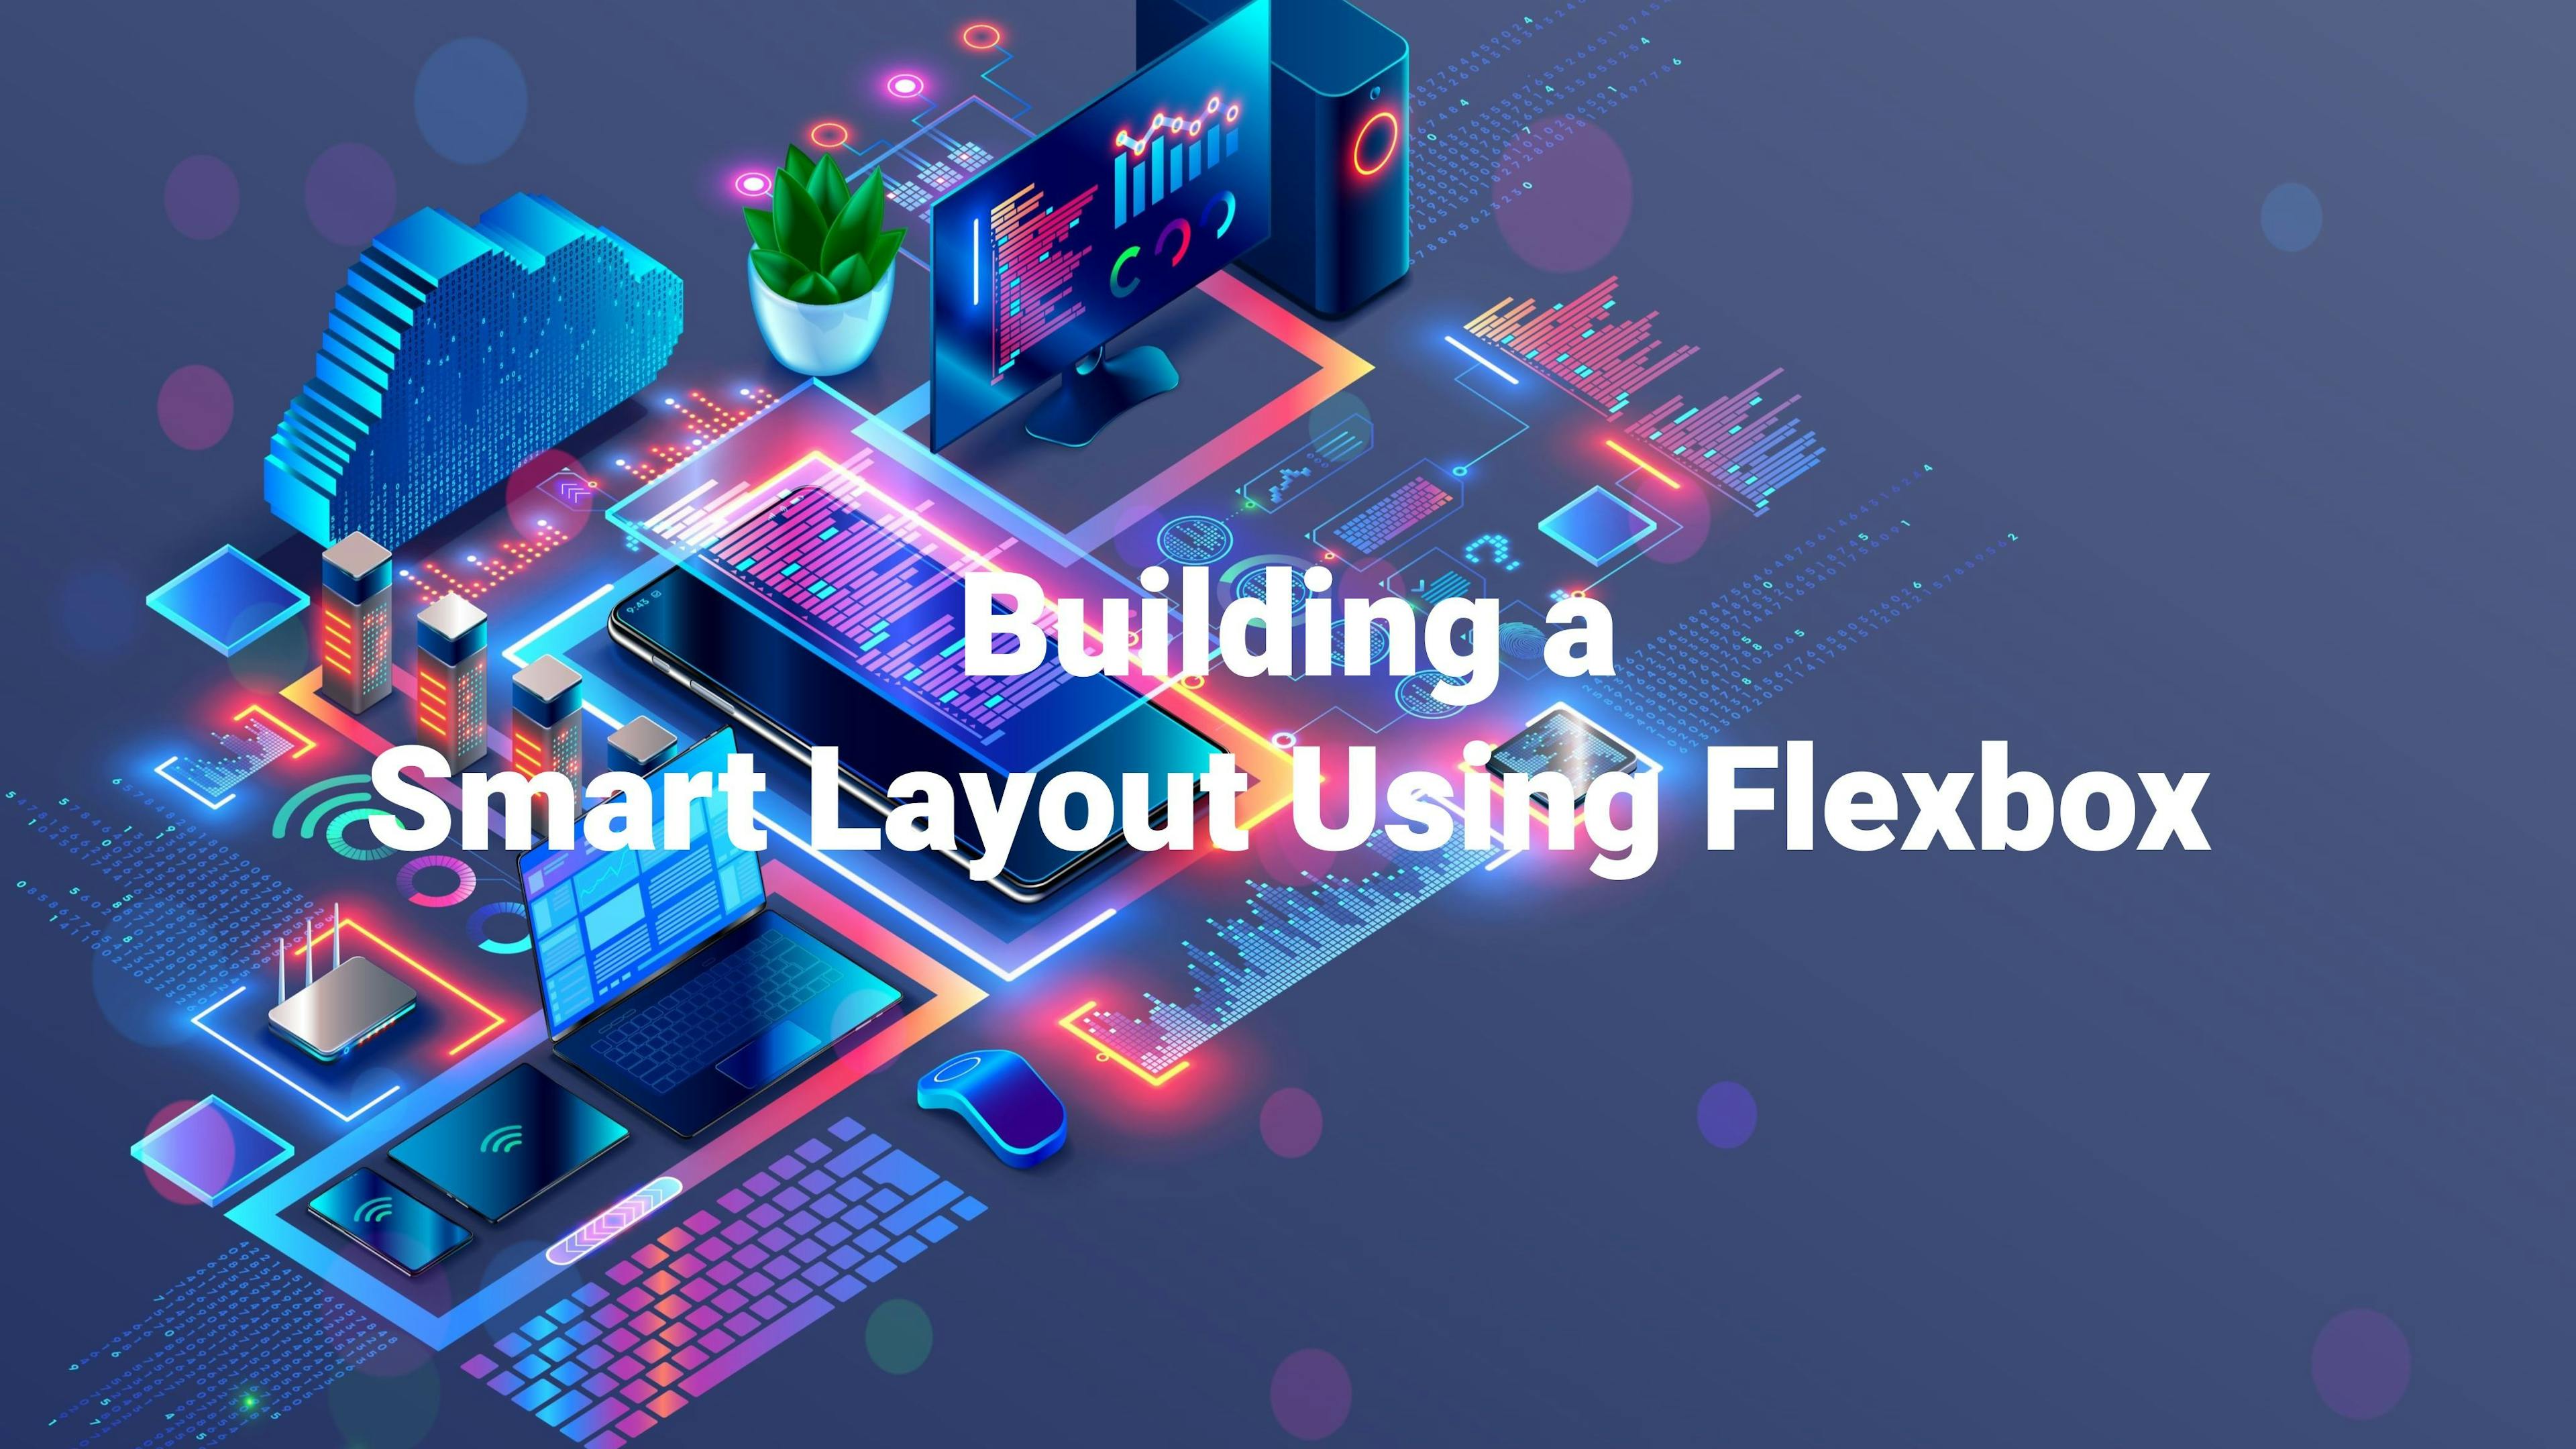 Building a Smart Layout using Flexbox